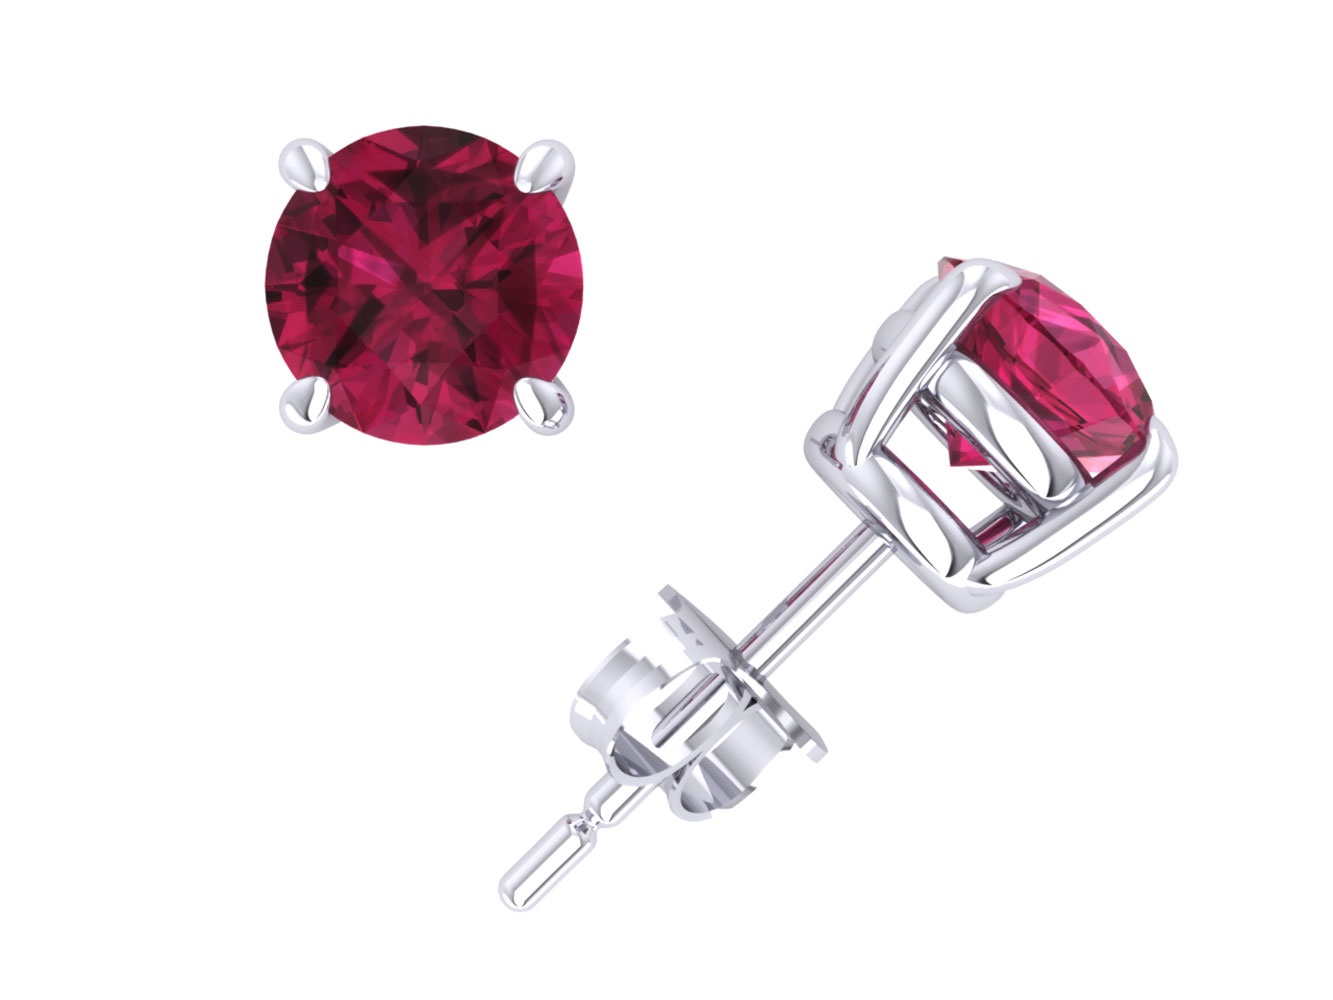 Jewel We Sell 2Ct Round Cut Pink Sapphire Basket Solitaire Stud Earrings 14k White or Yellow Gold Prong Commercial Quality